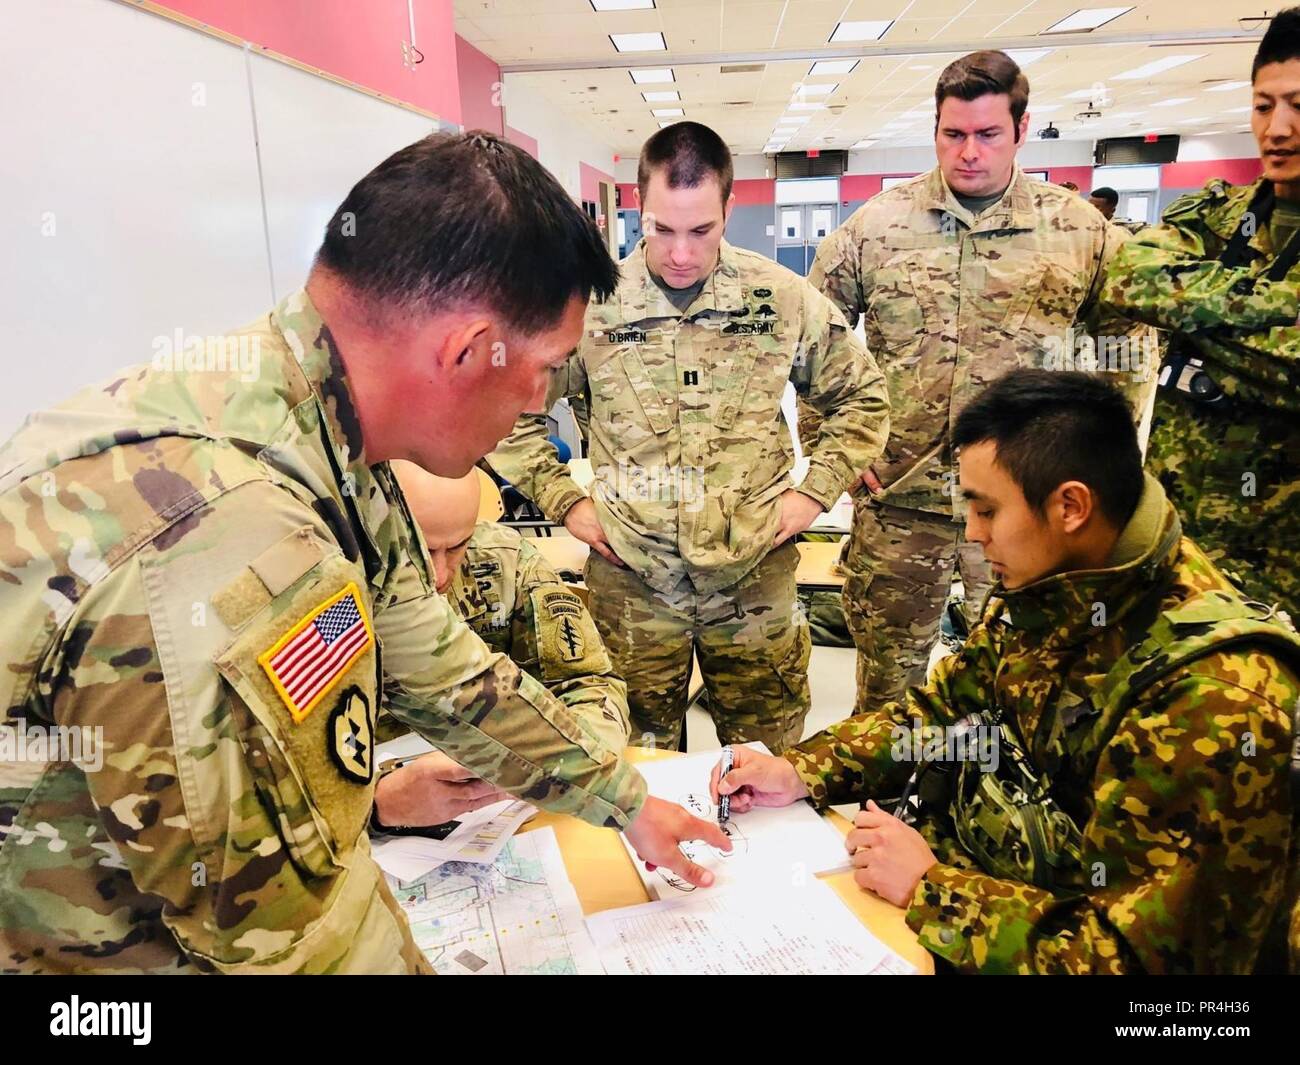 Staff Sgt Miller Provides A Translation For High Altitude Low Opening Parachute Jump Calculations To Japanese Free Fall Jump Masters Of The Japan Ground Self Defense Force Prior To A Jump At Eielson